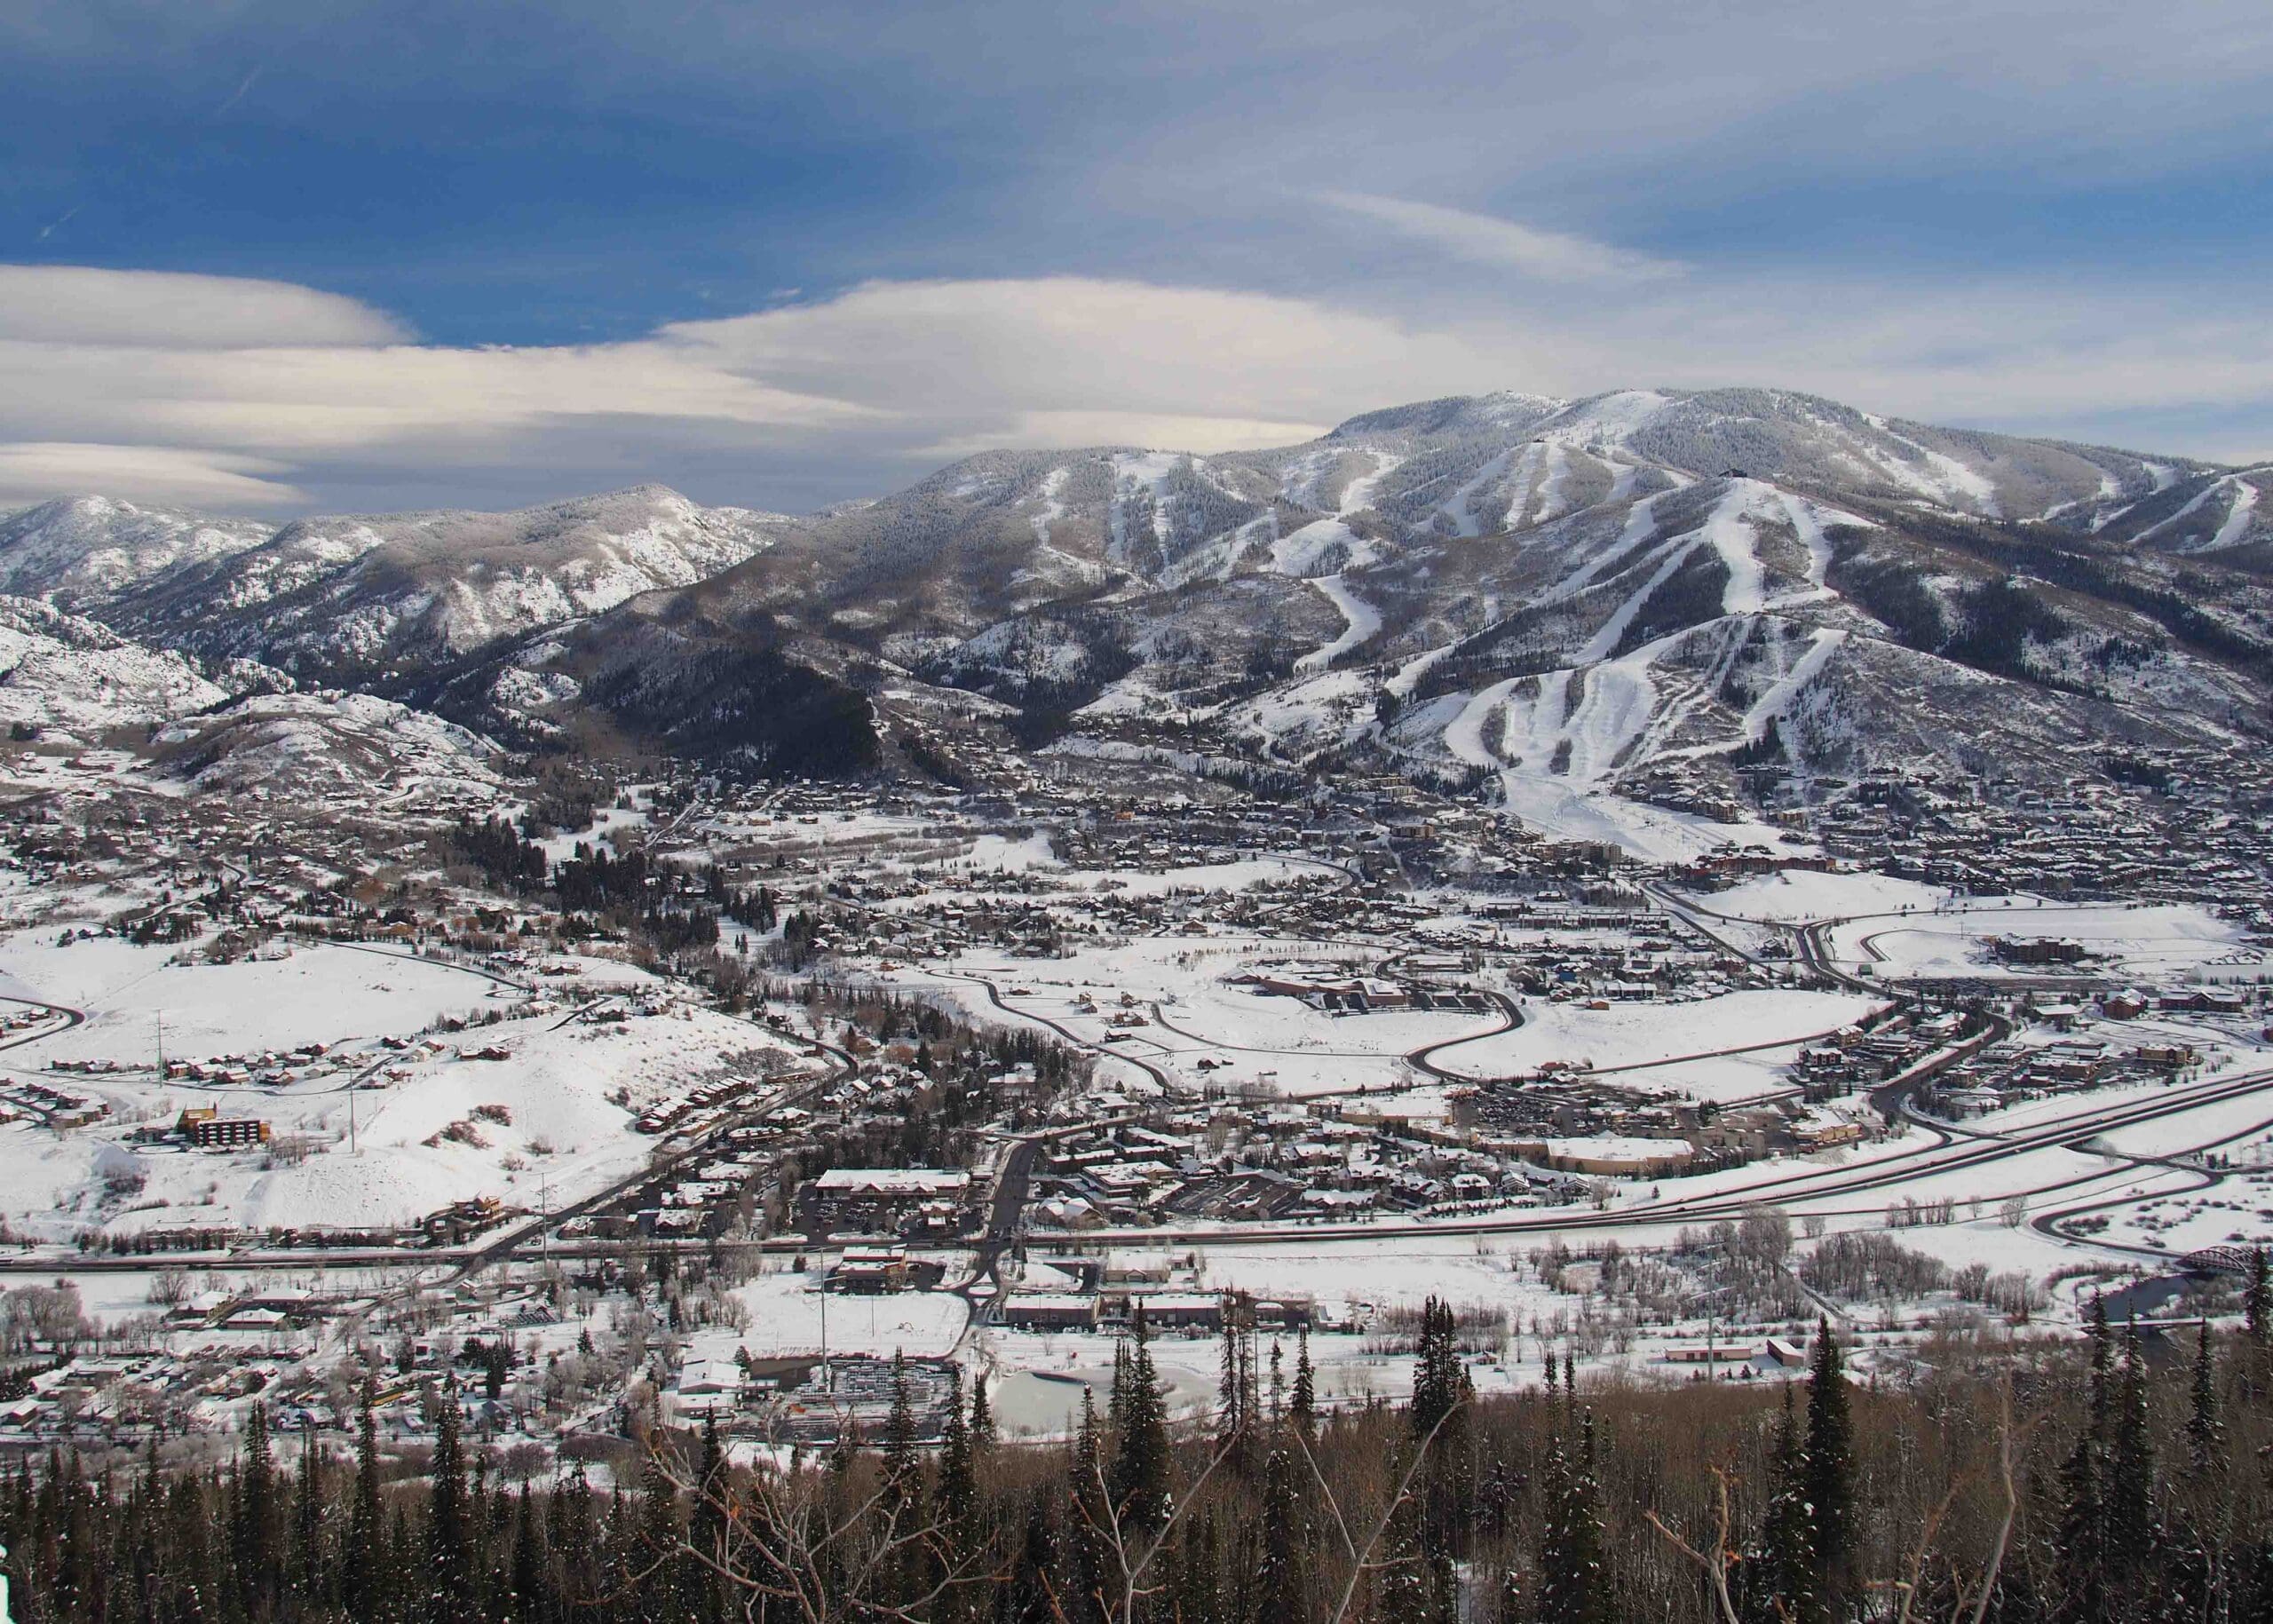 Steamboat resort and Mt werner